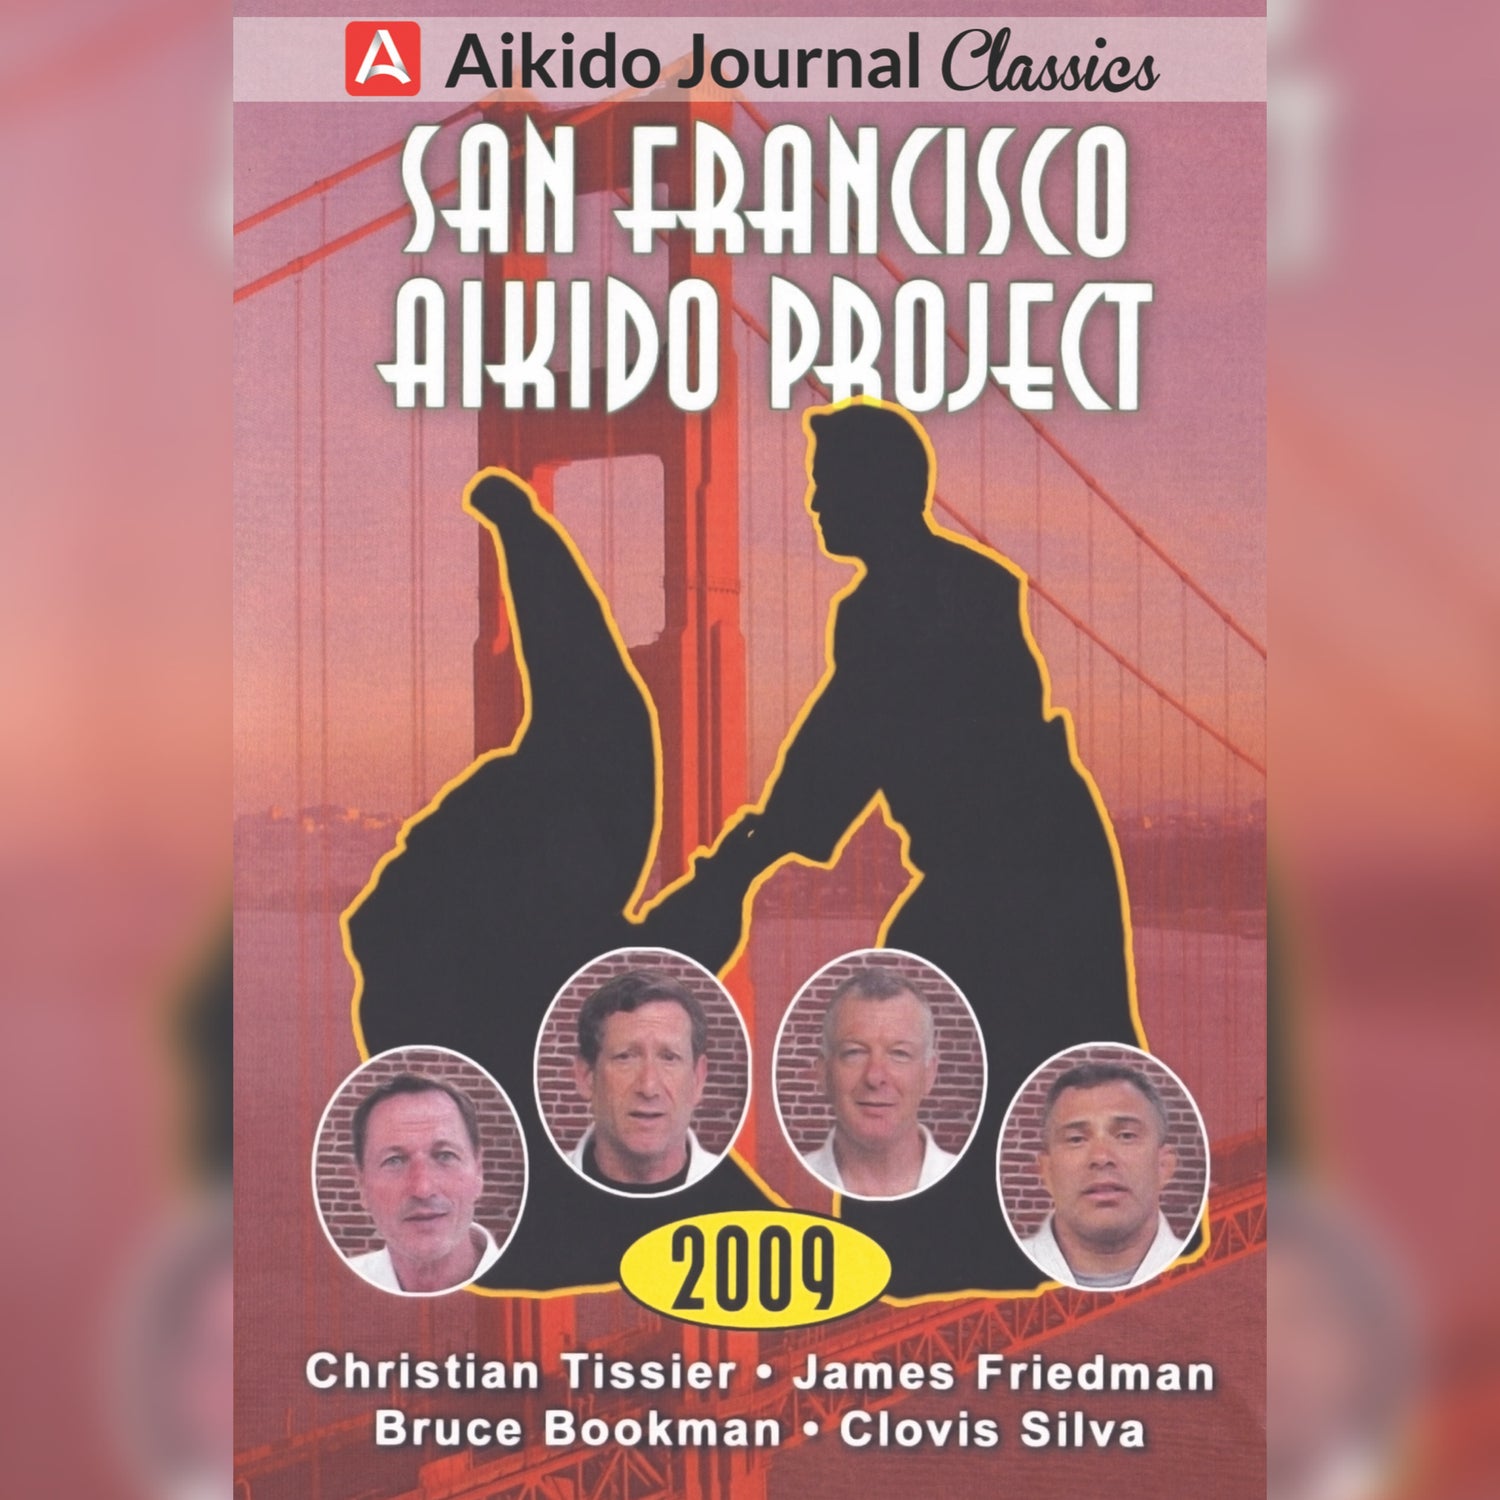 San Francisco Aikido Project (On Demand)